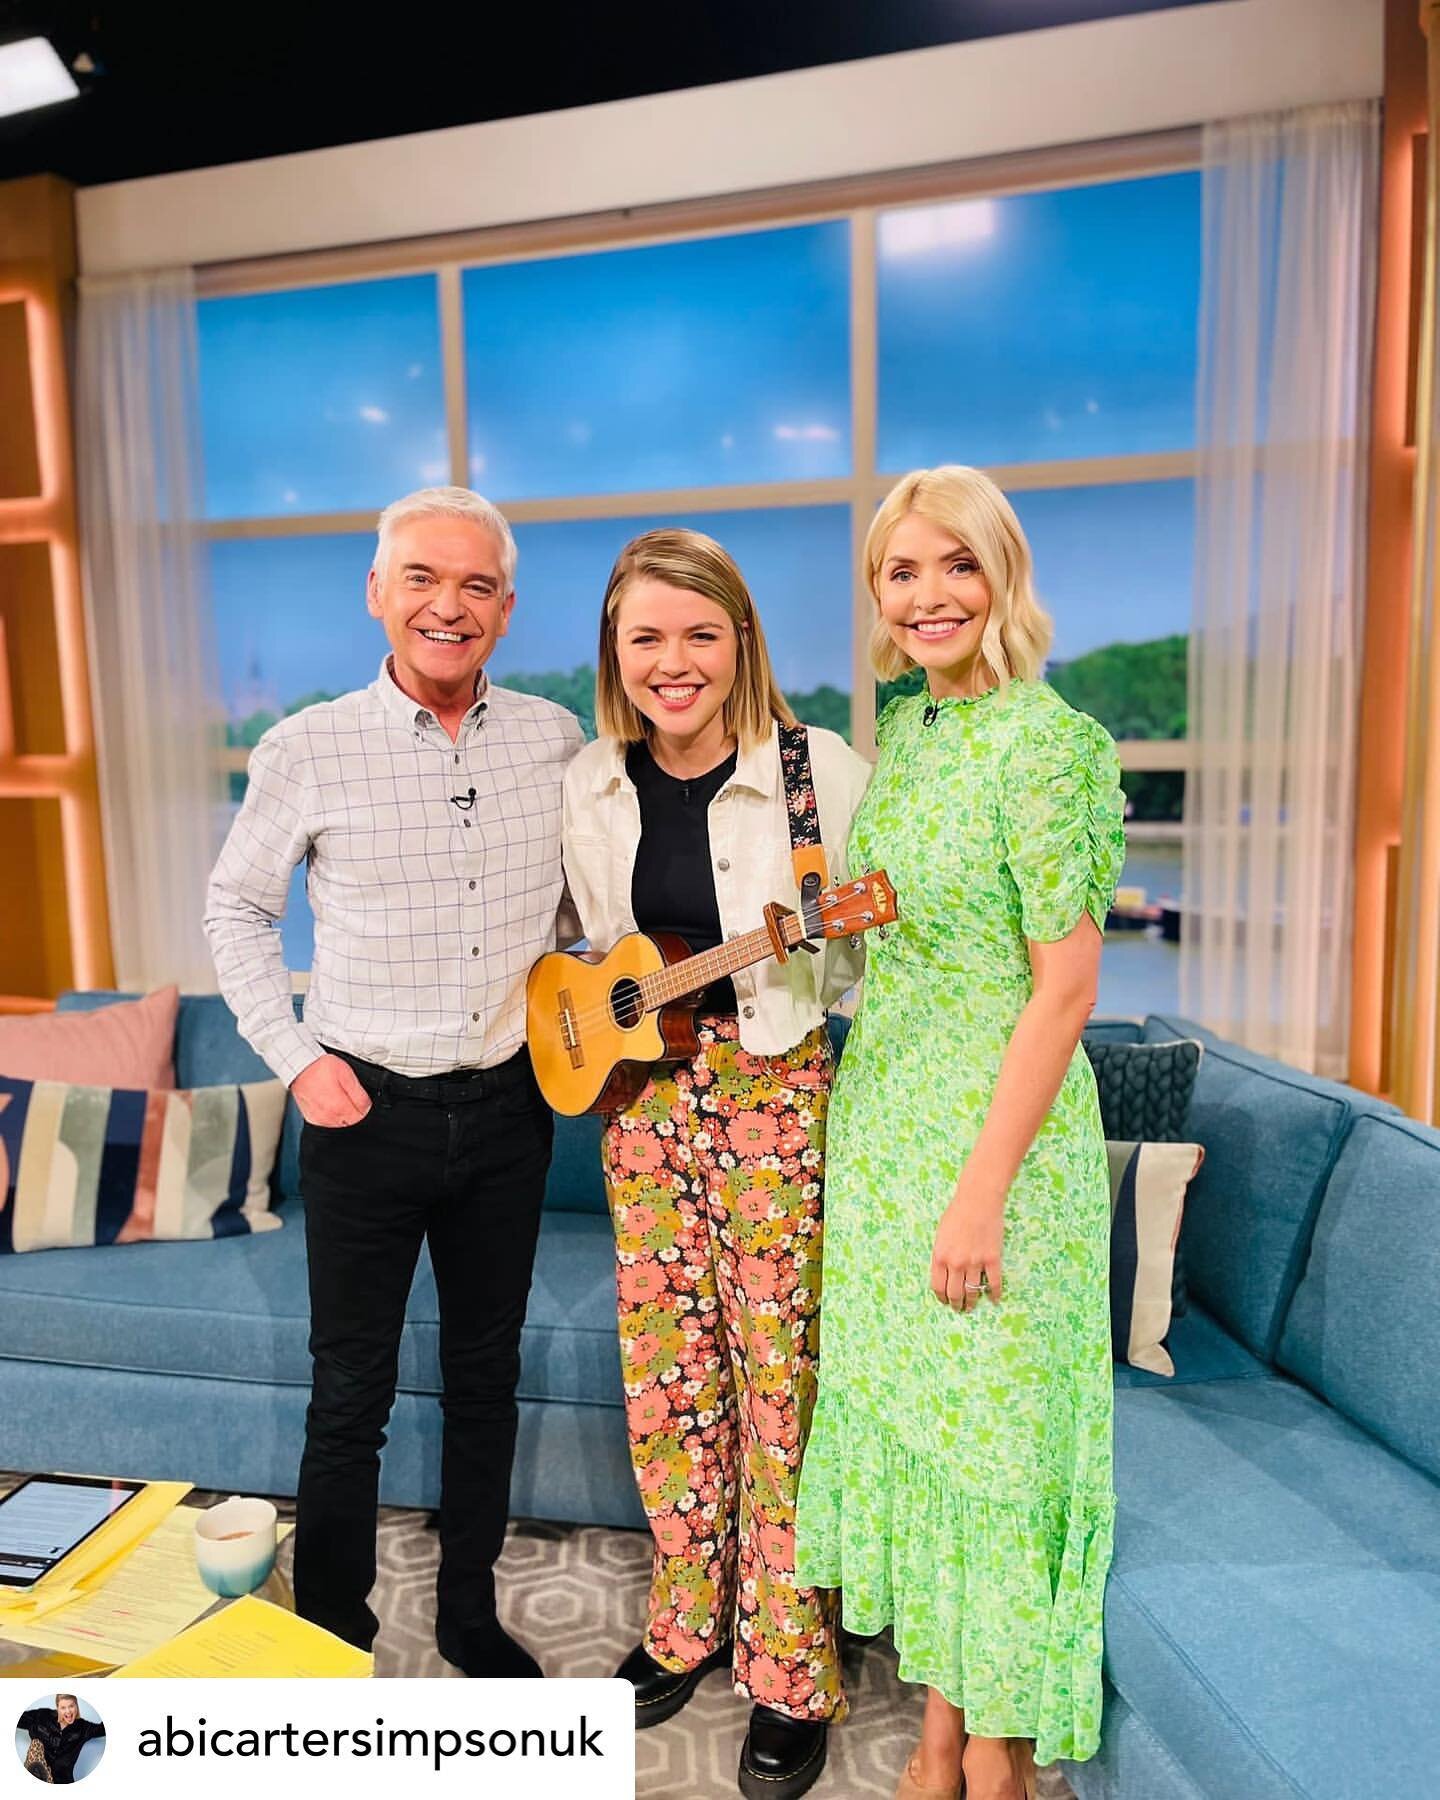 @abicartersimpsonuk singing LIVE on @thismorning yesterday &bull; if you missed it watch on catch up 

#bgt #britainsgottalent #thismorning #itv #mondaymorning #comedy #musicalcomedy #ukulele #songs #singer #laugh #happy